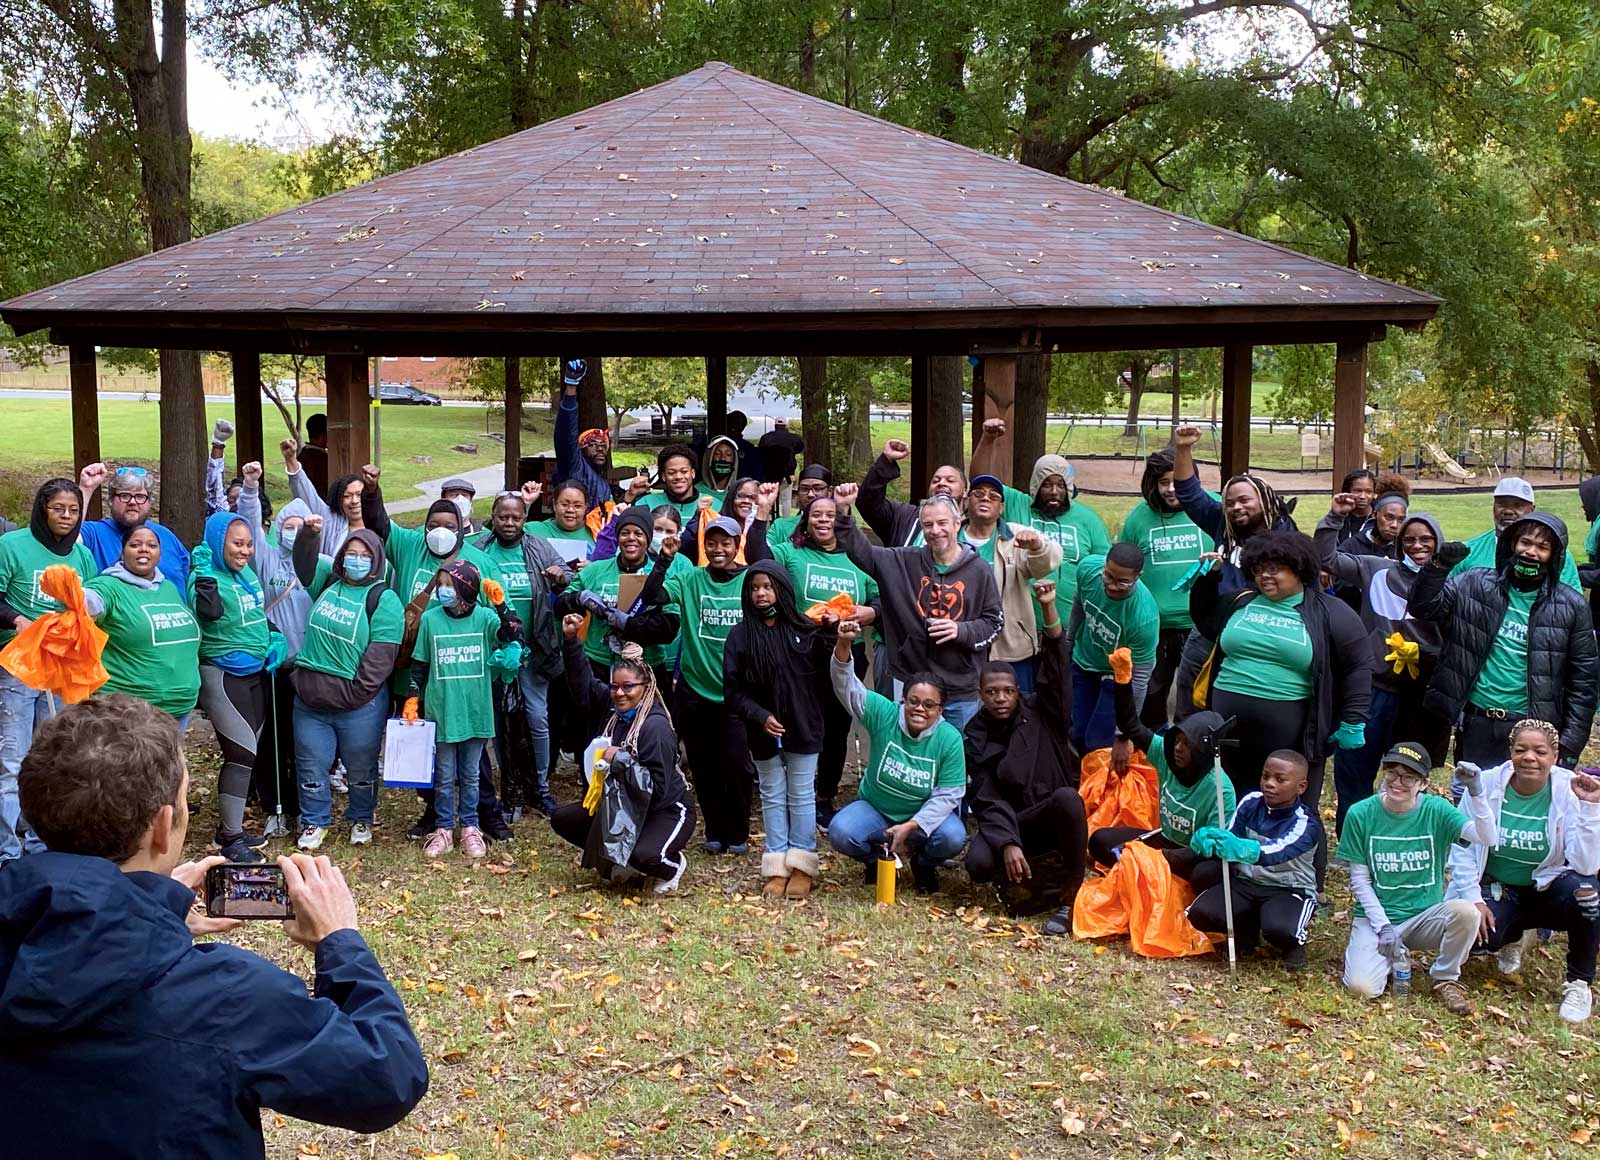 A group of community members with matching t-shirts smiles and raises fists in a park while a photographer takes their photo